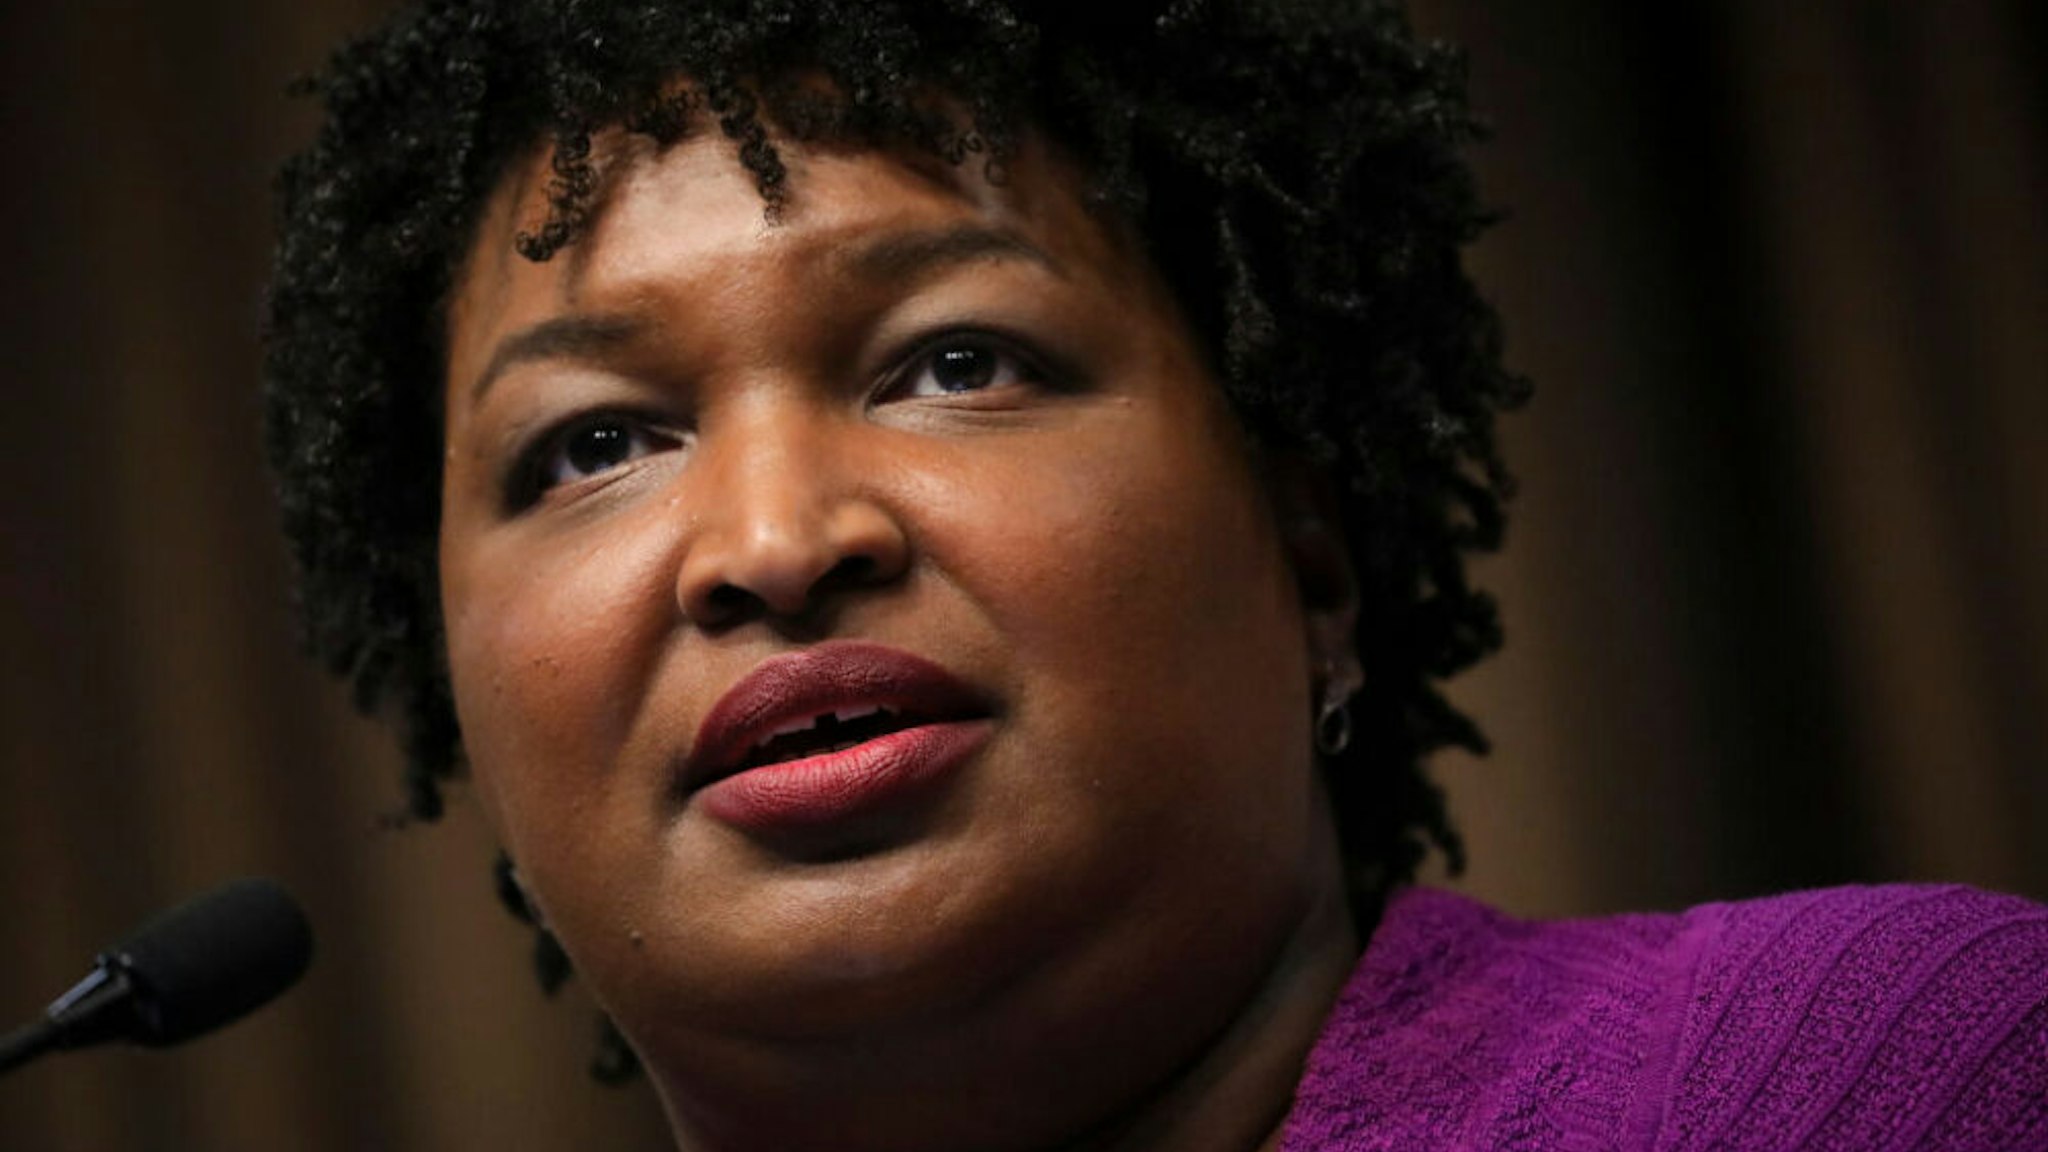 NEW YORK, NY - APRIL 3: Former Georgia Gubernatorial candidate Stacey Abrams speaks at the National Action Network's annual convention, April 3, 2019 in New York City. A dozen 2020 Democratic presidential candidates will speak at the organization's convention this week. Founded by Rev. Al Sharpton in 1991, the National Action Network is one of the most influential African American organizations dedicated to civil rights in America.